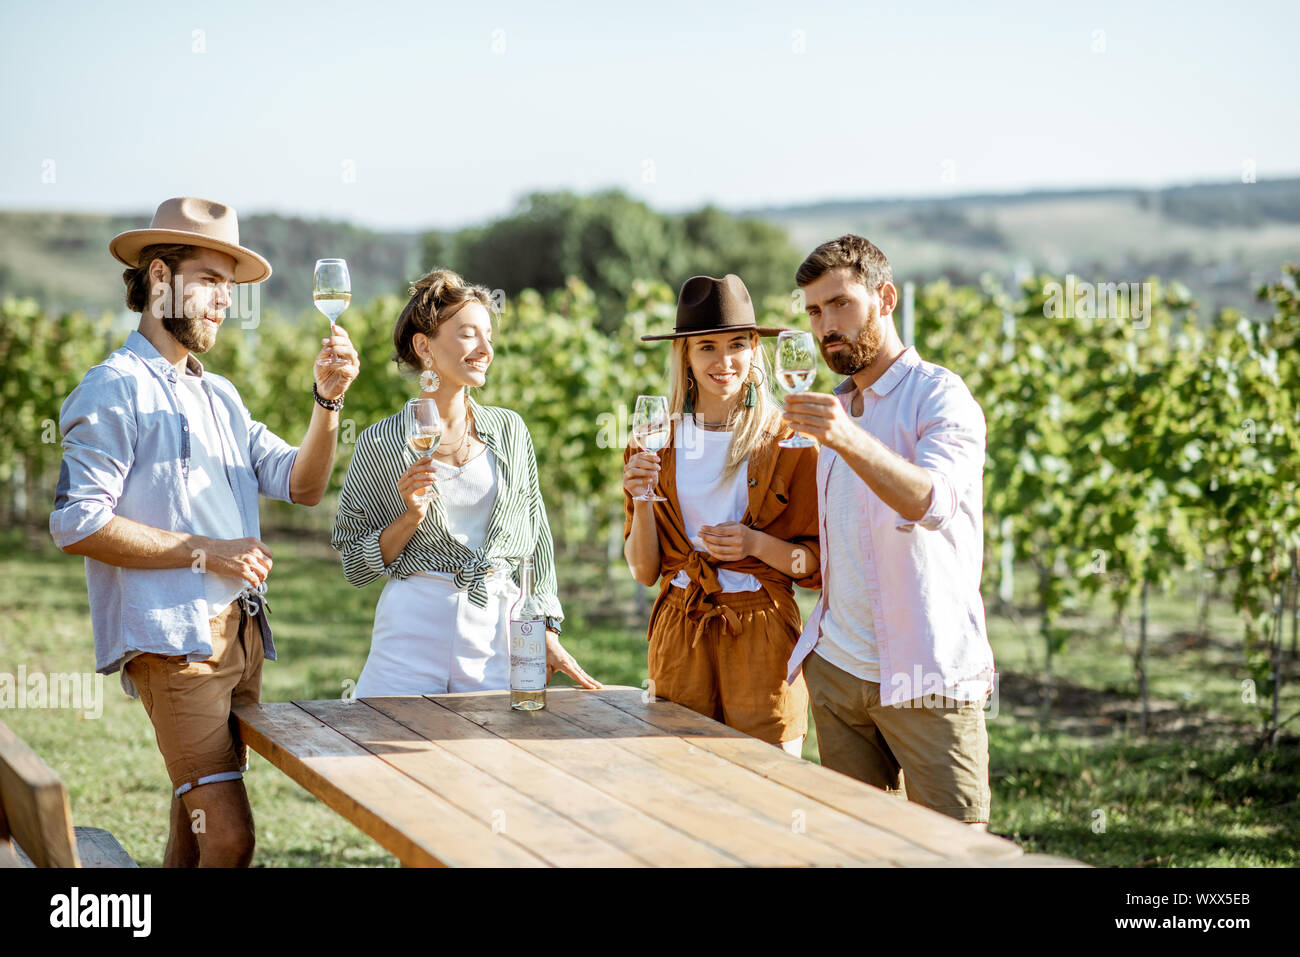 Group of young friends dressed casually having fun together, tasting wine on the vineyard on a sunny summer morning Stock Photo